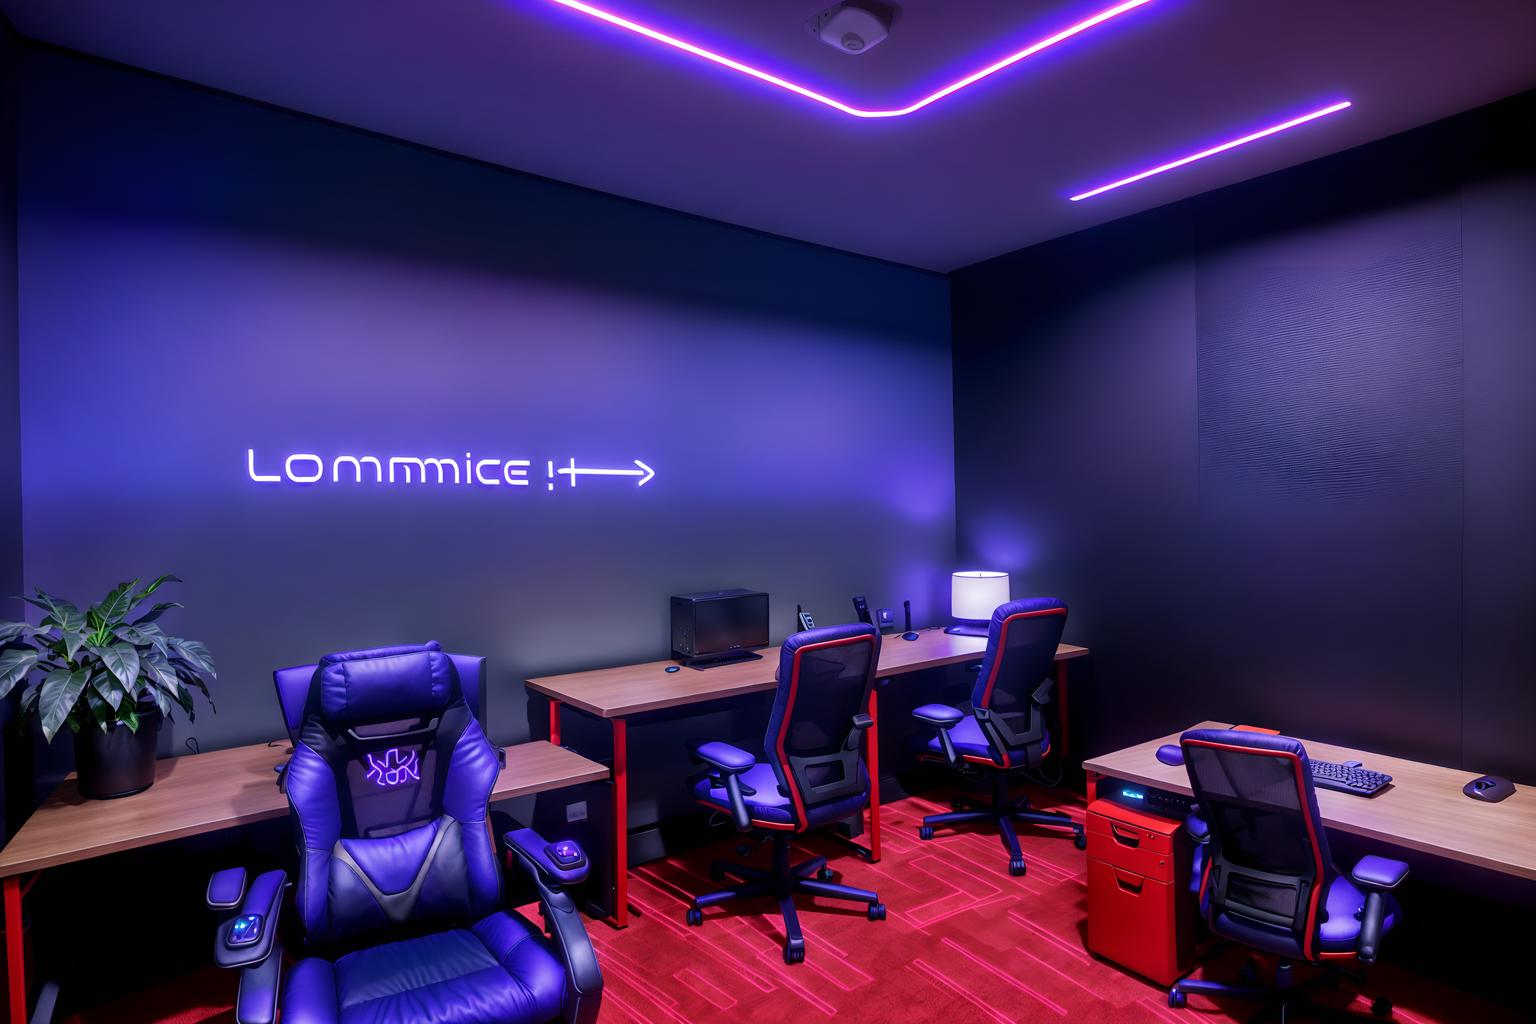 gaming room-style (office interior) with lounge chairs and plants and office chairs and windows and desk lamps and cabinets and computer desks and office desks. . with dark walls and neon lights and at night and computer desk with computer displays and keyboard and gaming chair and neon letters on wall and purple, red and blue fade light and purple and red lights. . cinematic photo, highly detailed, cinematic lighting, ultra-detailed, ultrarealistic, photorealism, 8k. gaming room interior design style. masterpiece, cinematic light, ultrarealistic+, photorealistic+, 8k, raw photo, realistic, sharp focus on eyes, (symmetrical eyes), (intact eyes), hyperrealistic, highest quality, best quality, , highly detailed, masterpiece, best quality, extremely detailed 8k wallpaper, masterpiece, best quality, ultra-detailed, best shadow, detailed background, detailed face, detailed eyes, high contrast, best illumination, detailed face, dulux, caustic, dynamic angle, detailed glow. dramatic lighting. highly detailed, insanely detailed hair, symmetrical, intricate details, professionally retouched, 8k high definition. strong bokeh. award winning photo.